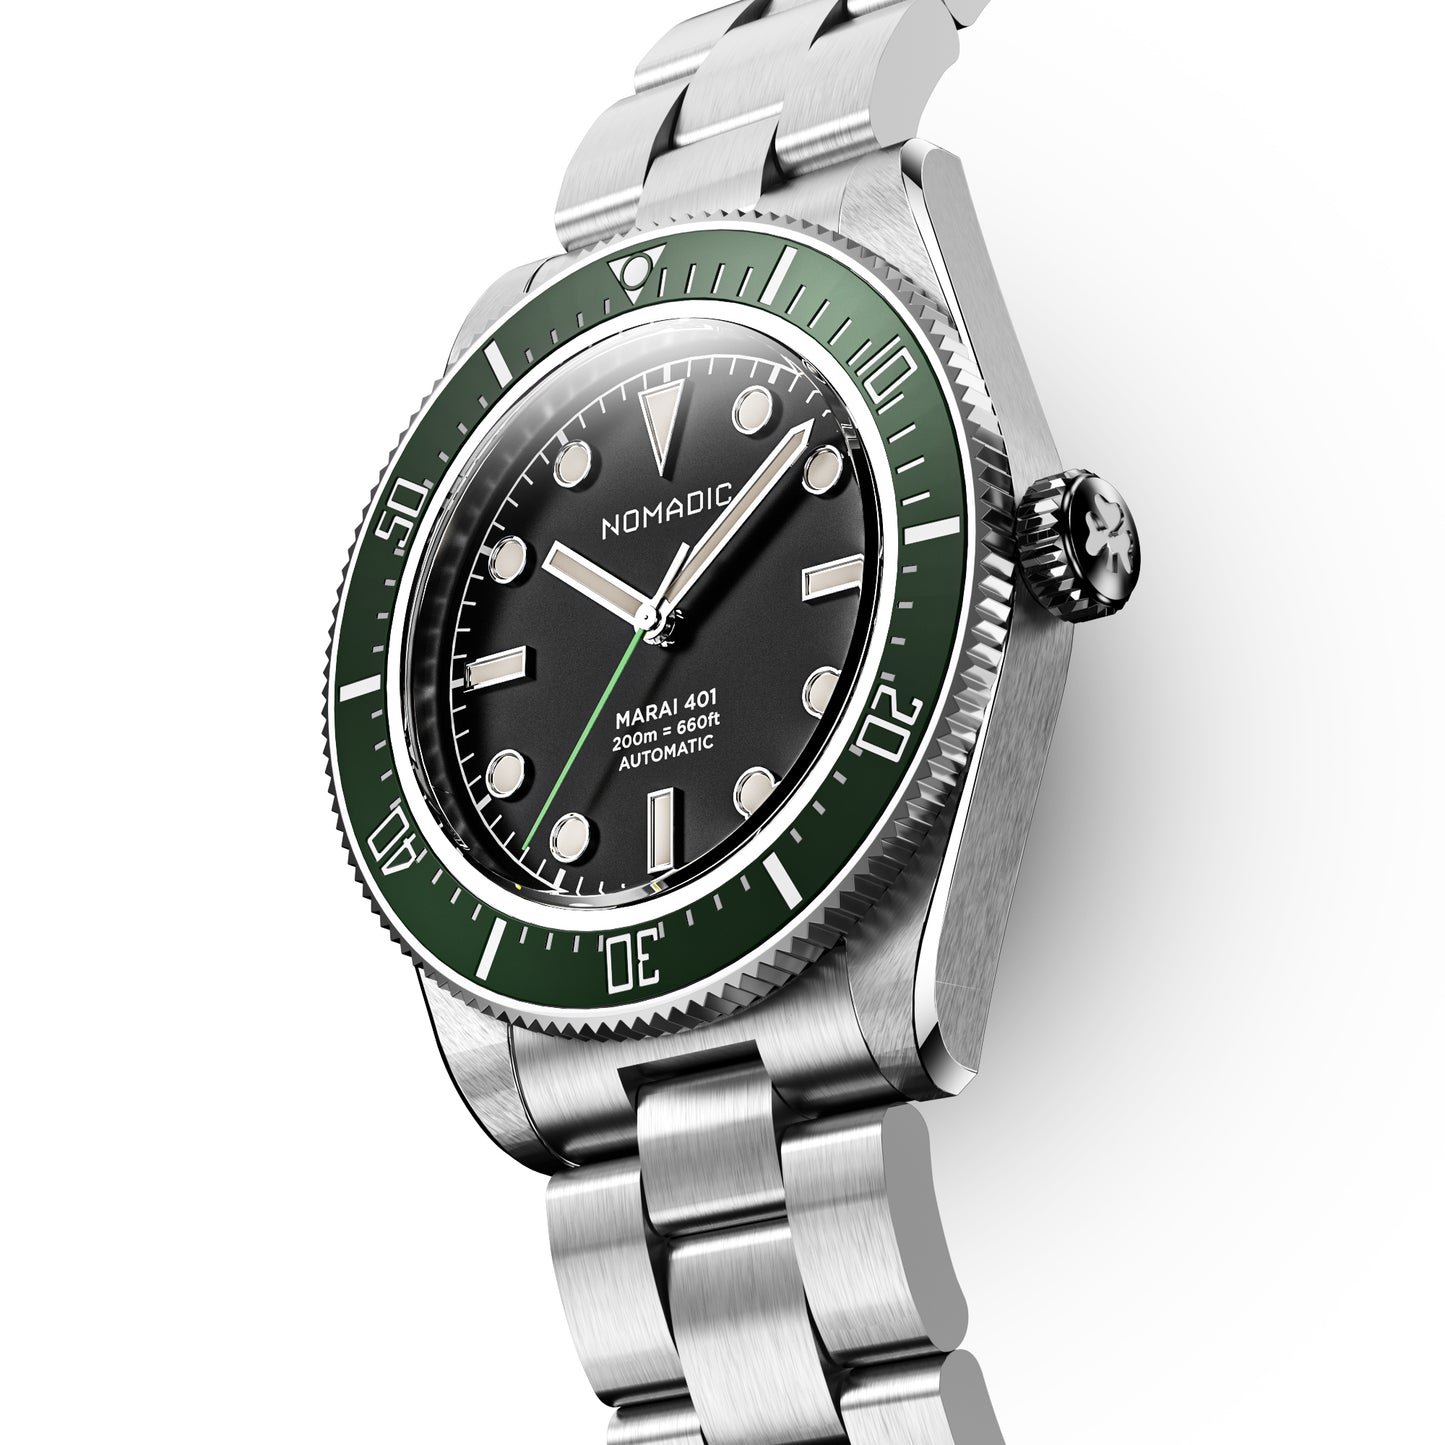 Special Project 003 - RIR - Maraí 401 - Dive Watch